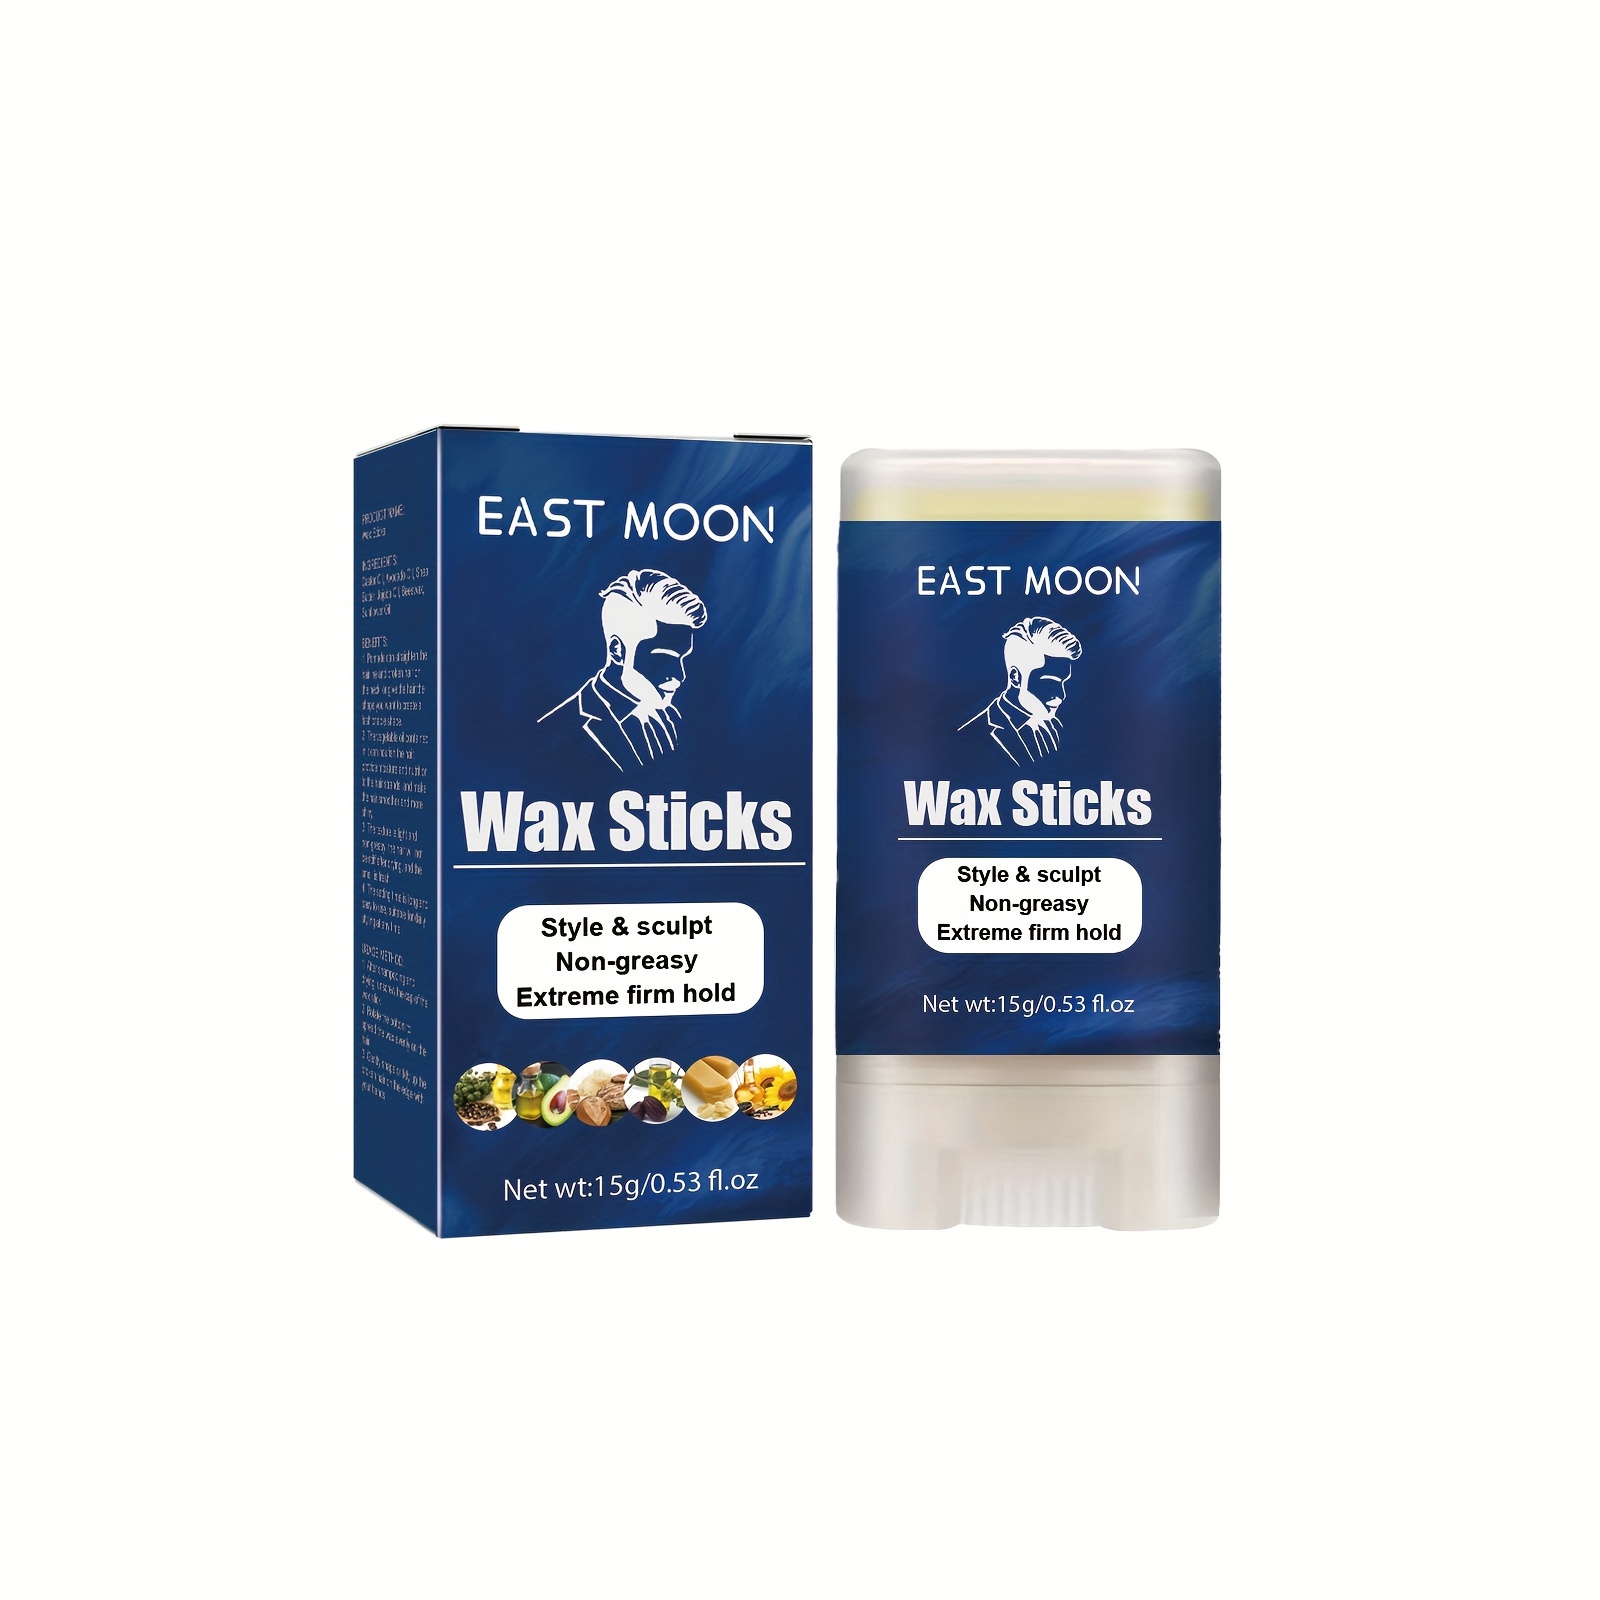 Wax Stick – The Standard Of Style